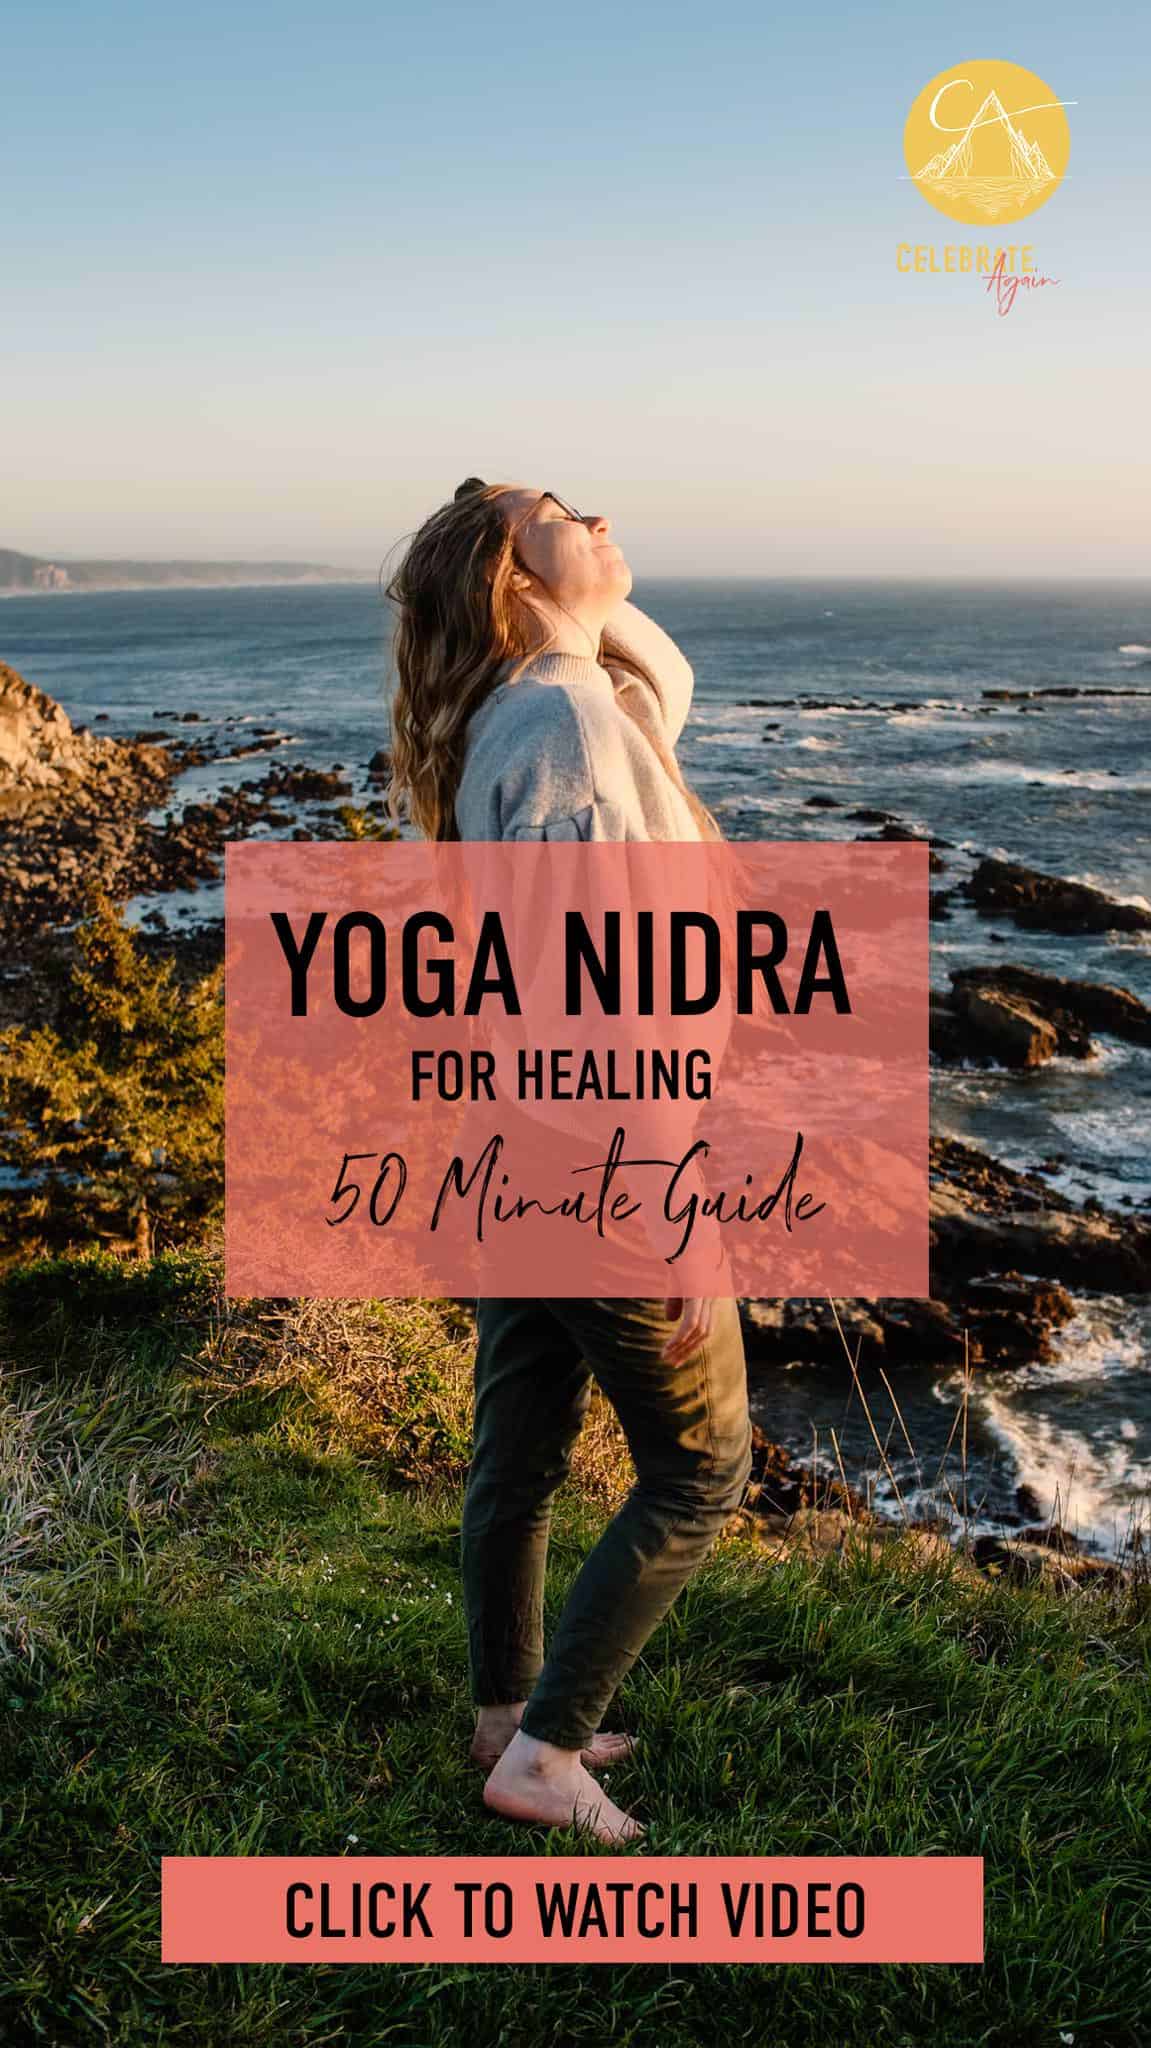 "yoga nidra for healing 50 minute guide" Emmy soaking up the sunset after a yoga nidra practice feeling amazing standing on the cliff edge of a beach